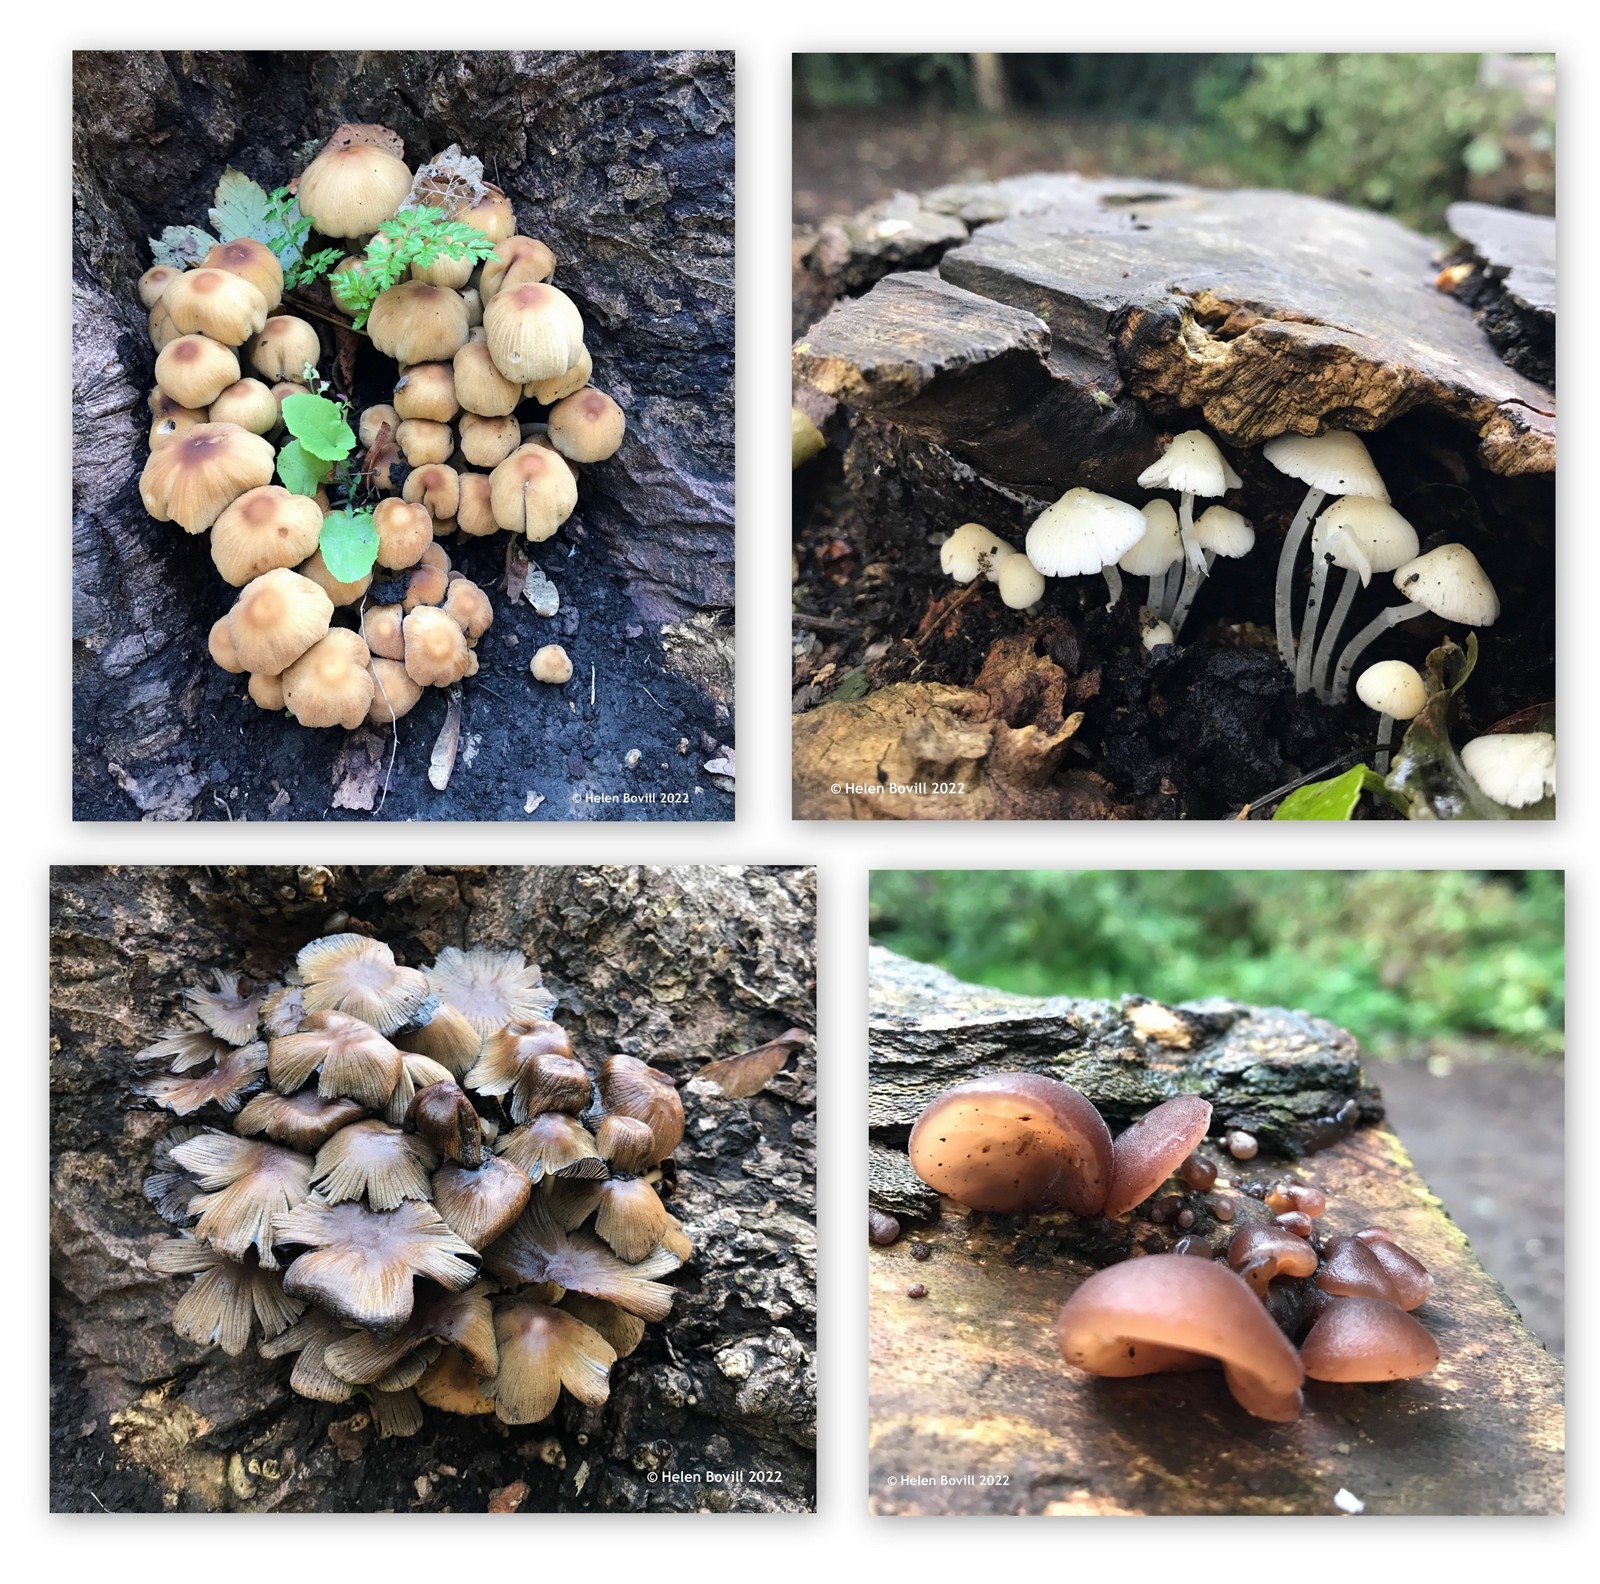 A selection of small mushrooms found in and around the cemetery